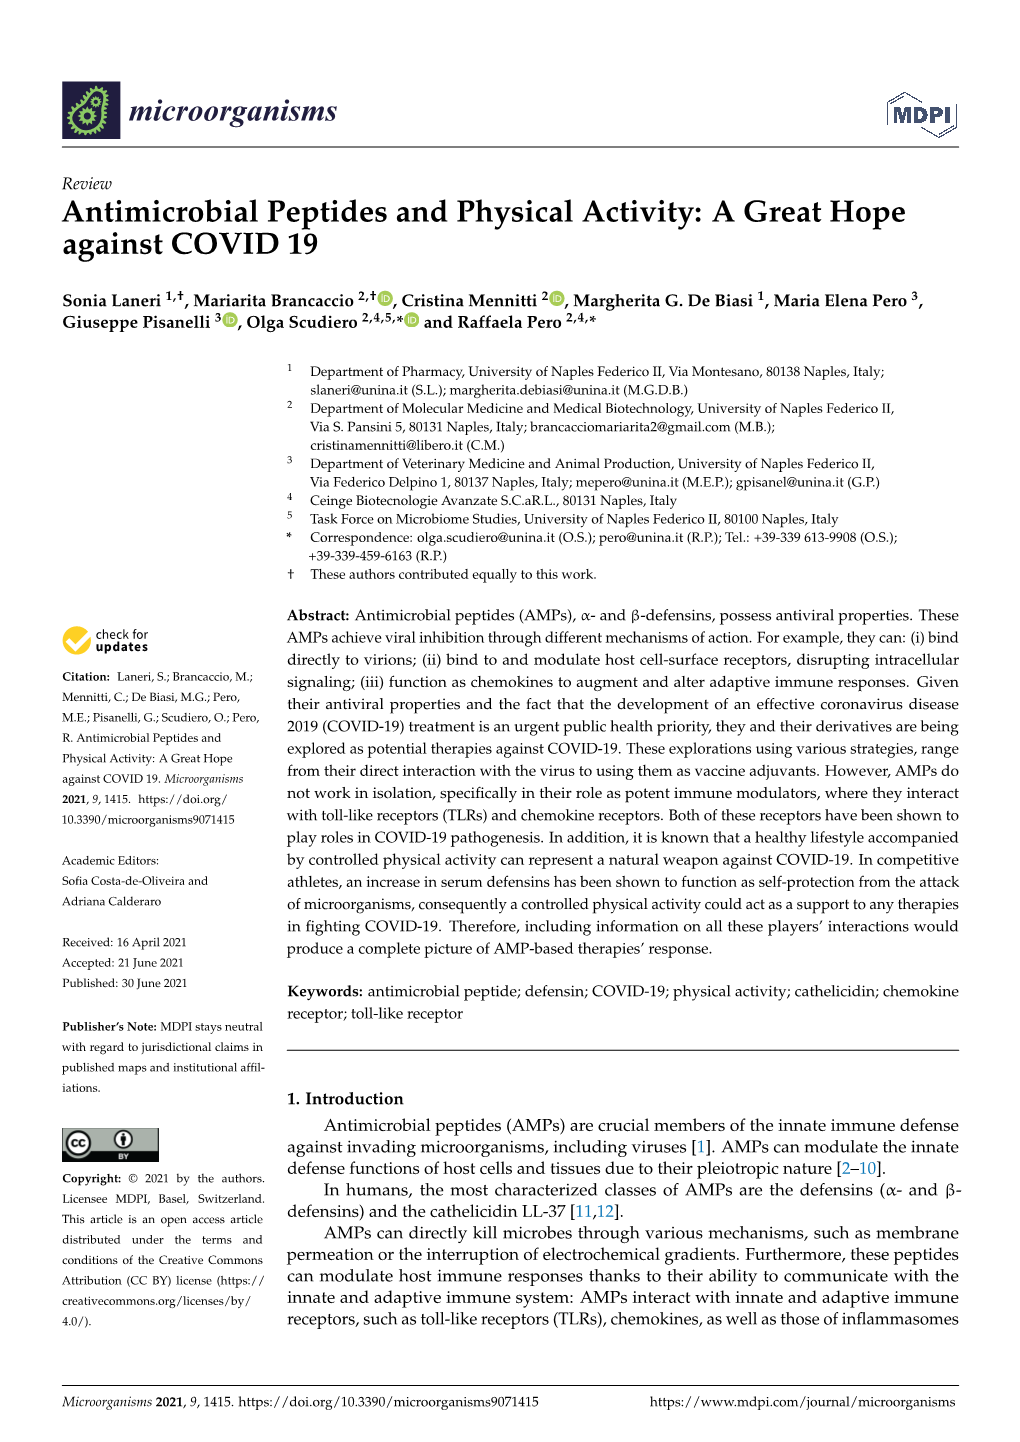 Antimicrobial Peptides and Physical Activity: a Great Hope Against COVID 19